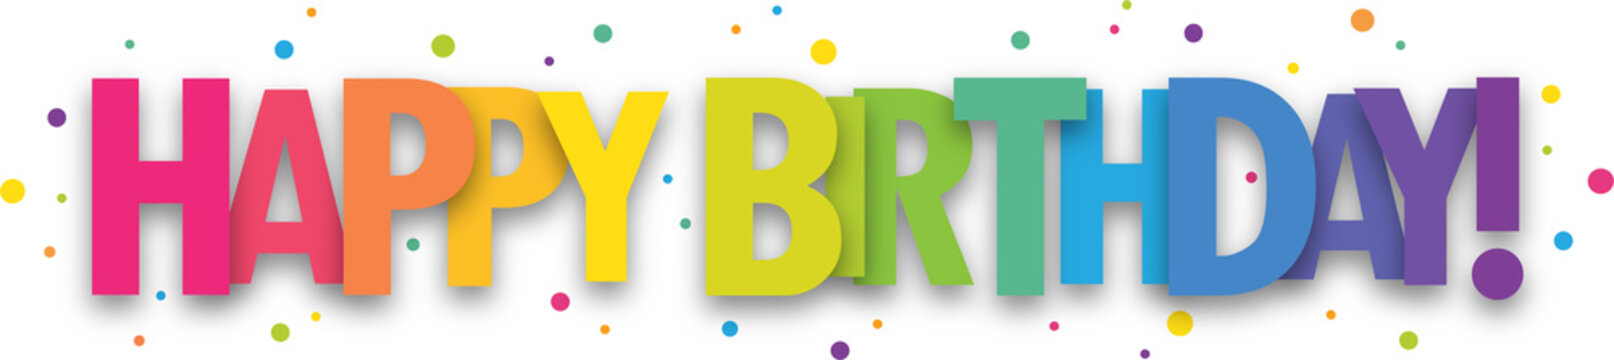 HAPPY BIRTHDAY! colorful vector typographic banner with dots on transparent background